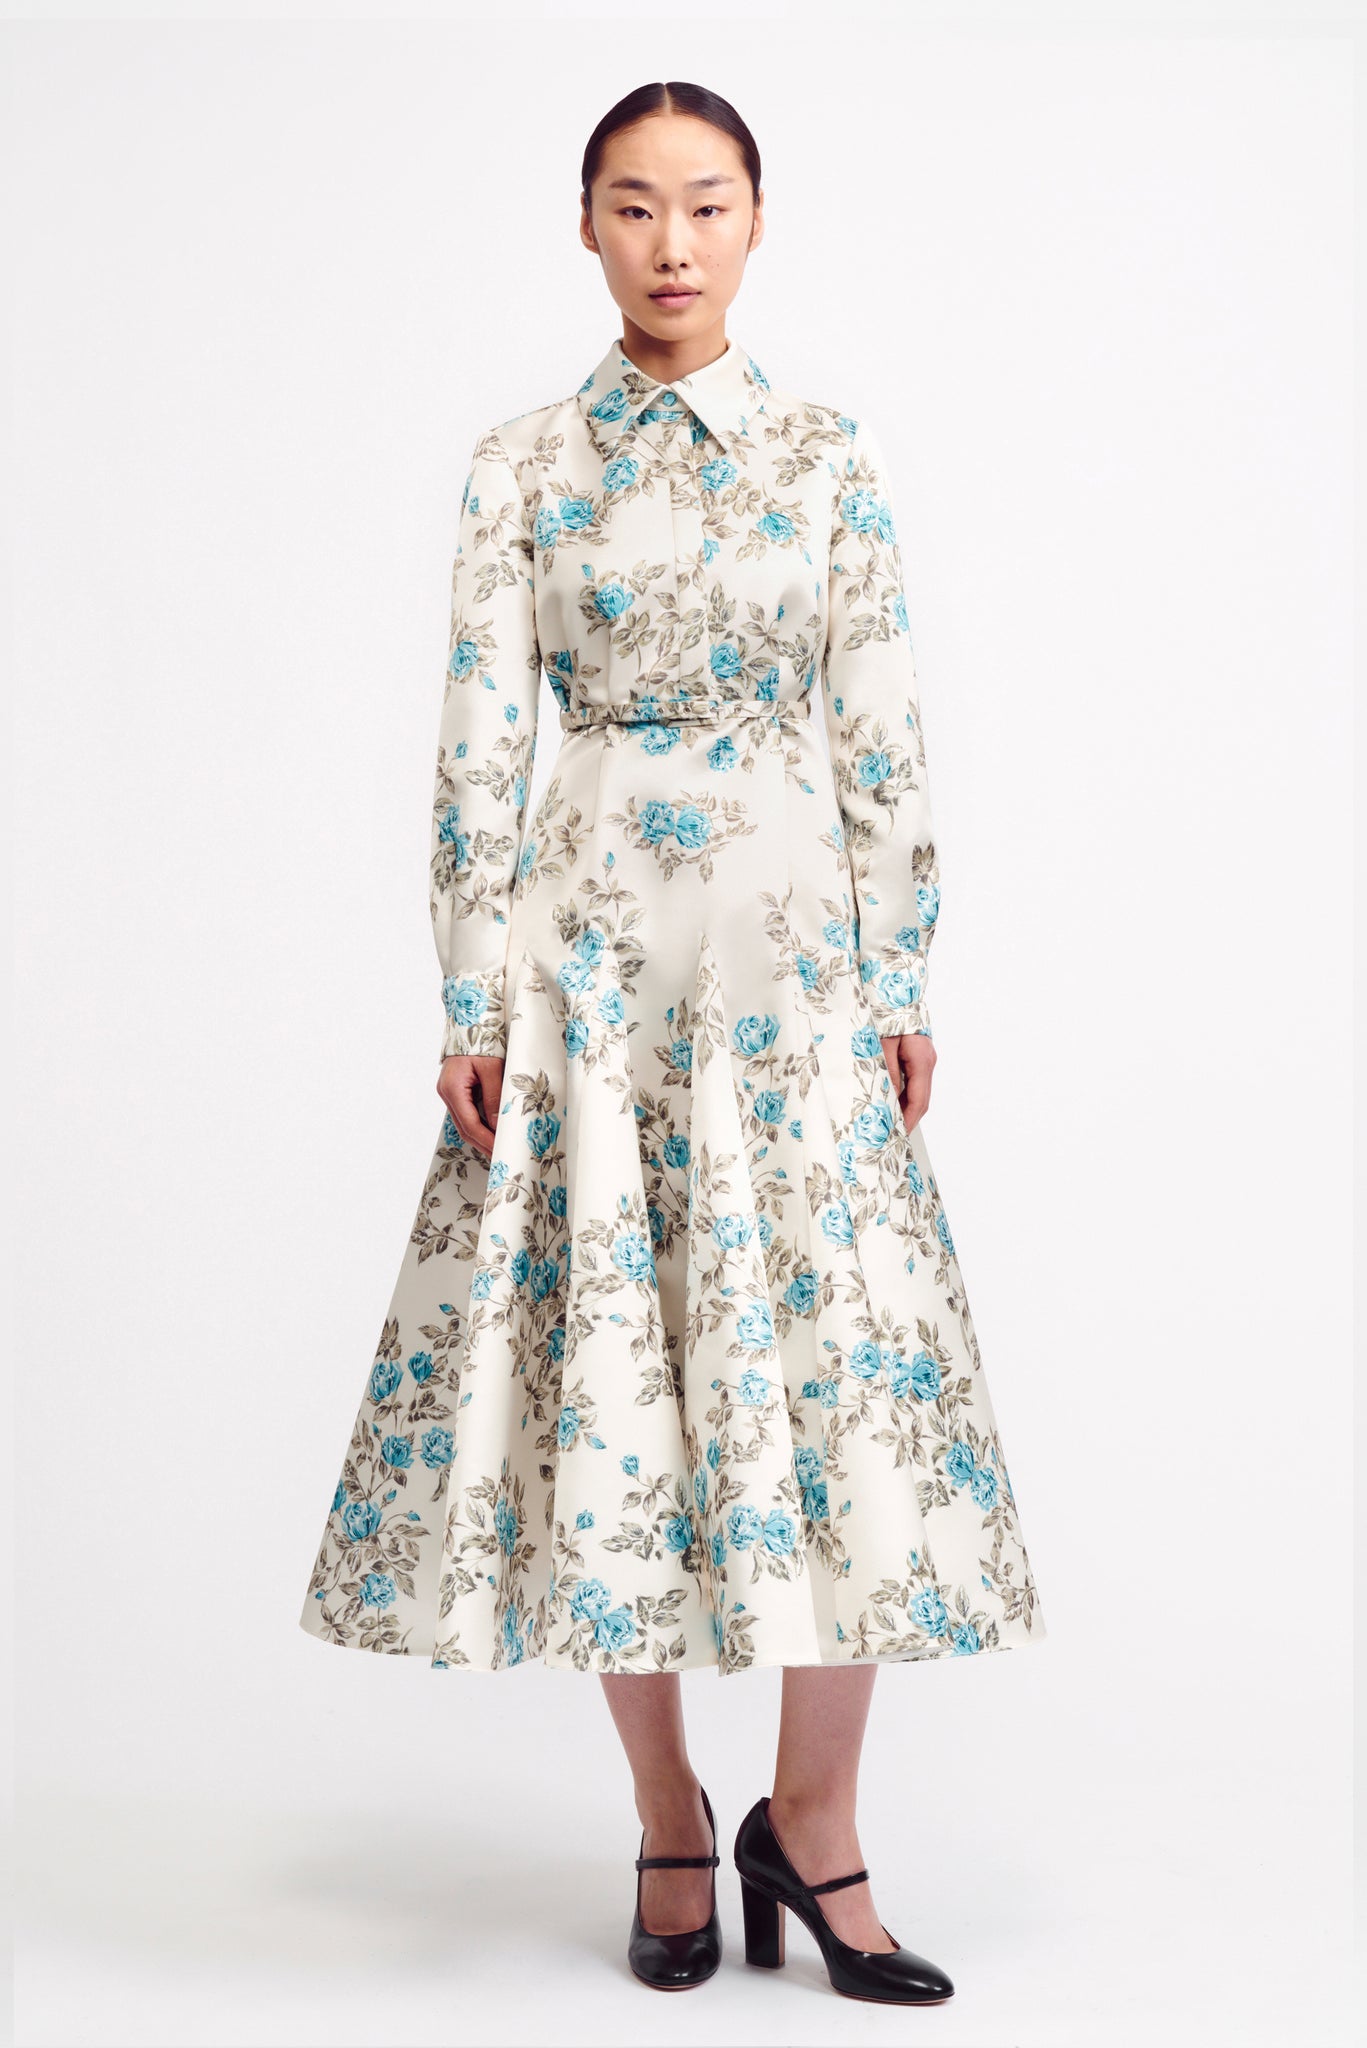 Marion Turquoise Floral Printed Italian Duchess Satin Dress